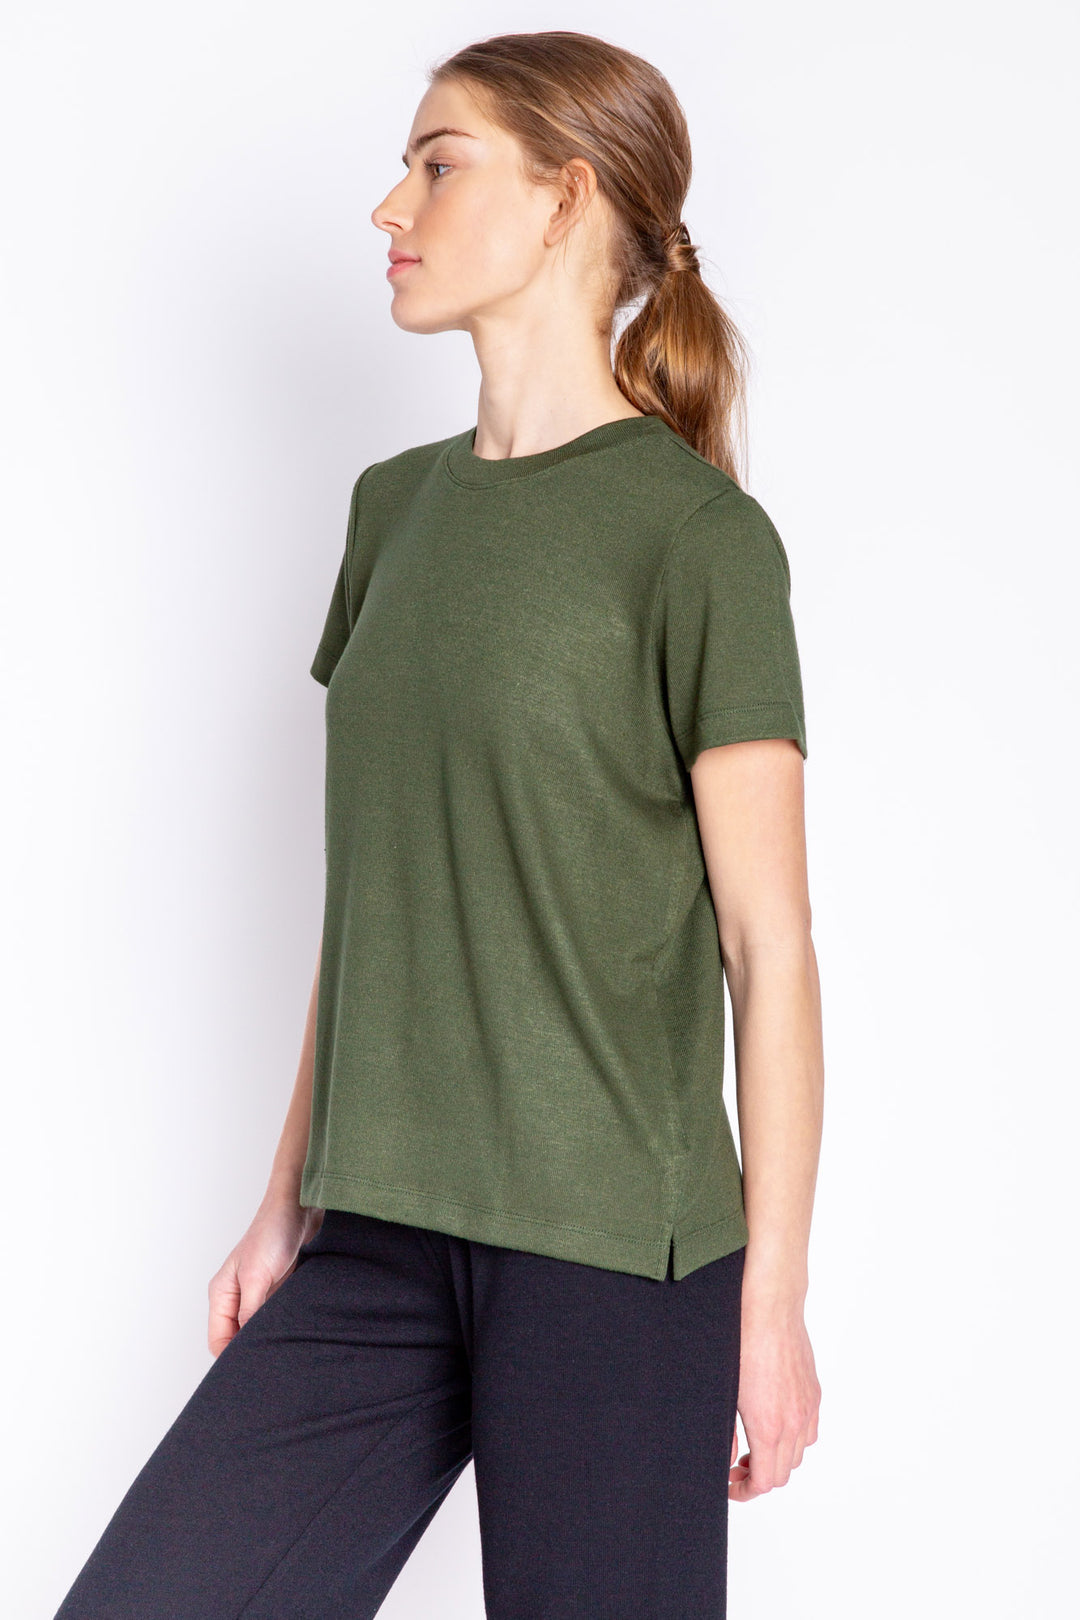 Bronze t-shirt in soft REPREVE® recycled knit (made from recycled bottles). With side vents to tuck in or out. (6685118333028)